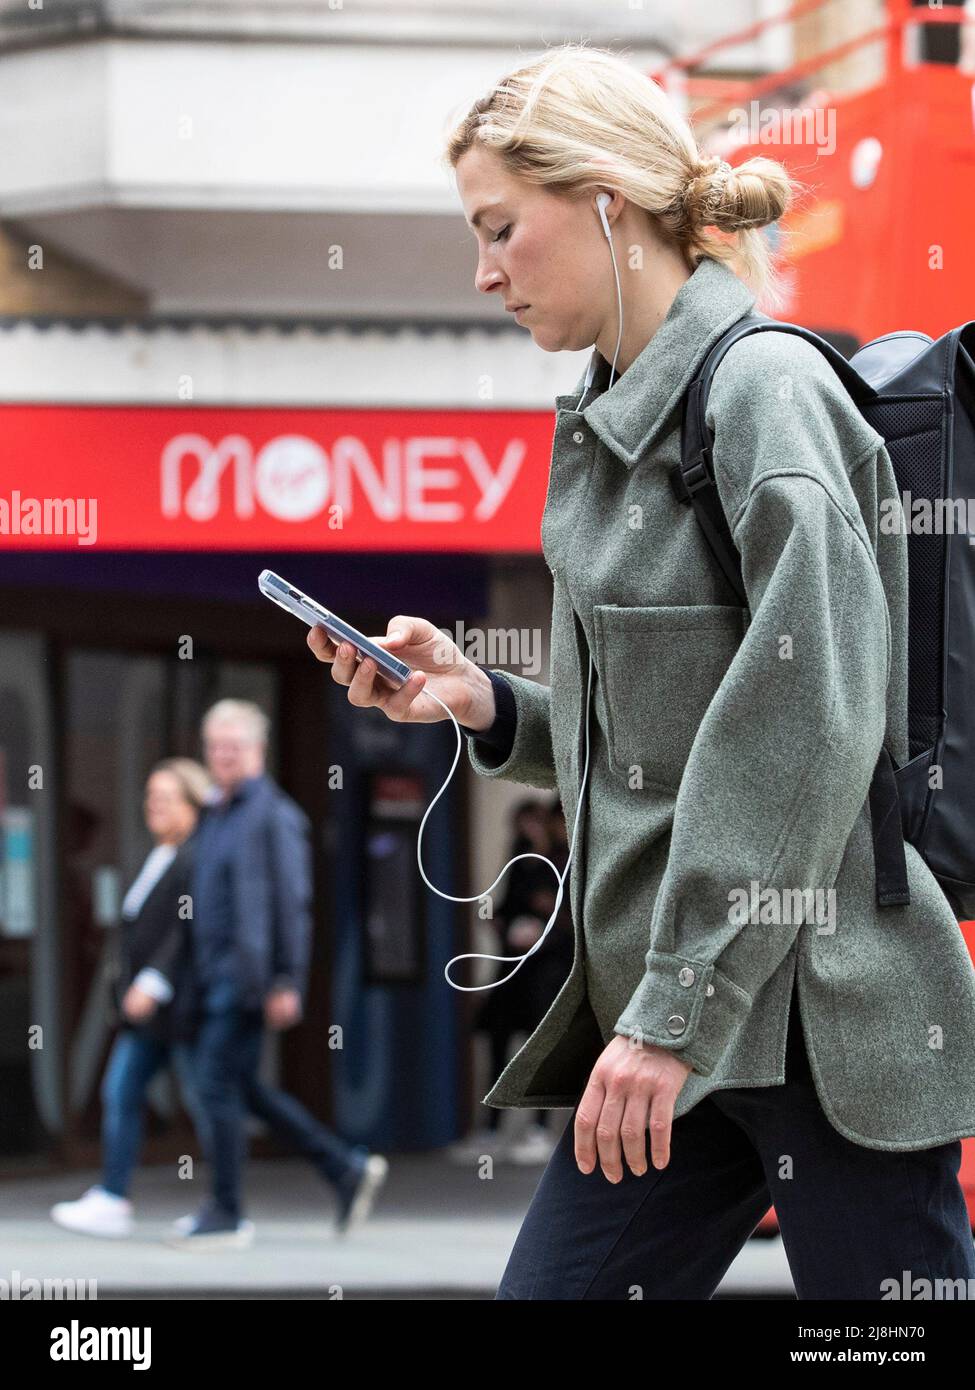 London - 16/05/2022. Credit: A woman looks at her phone as she walks past a Bank sign saying ‘Money’  in Central London as the cost of living crisis f Stock Photo